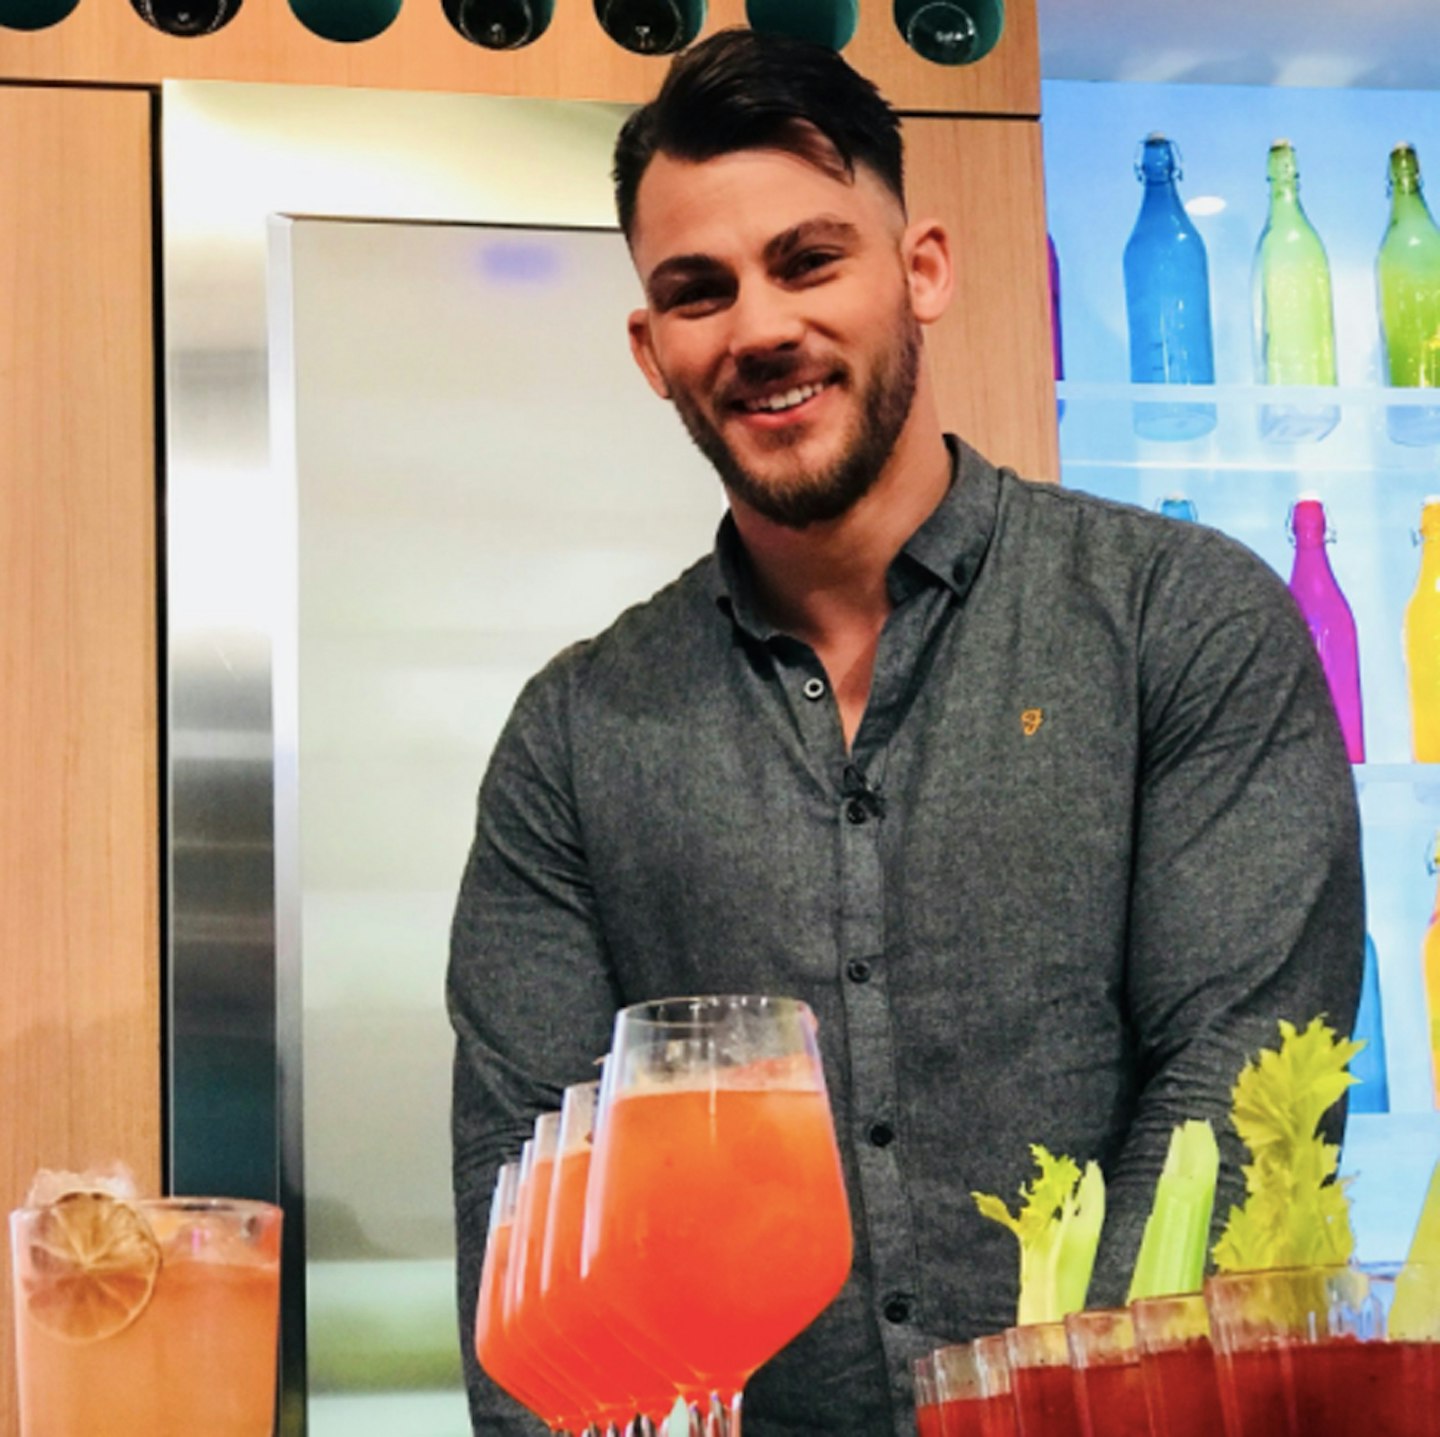 Sunday Brunch's drinks expert Carl Anthony Brown